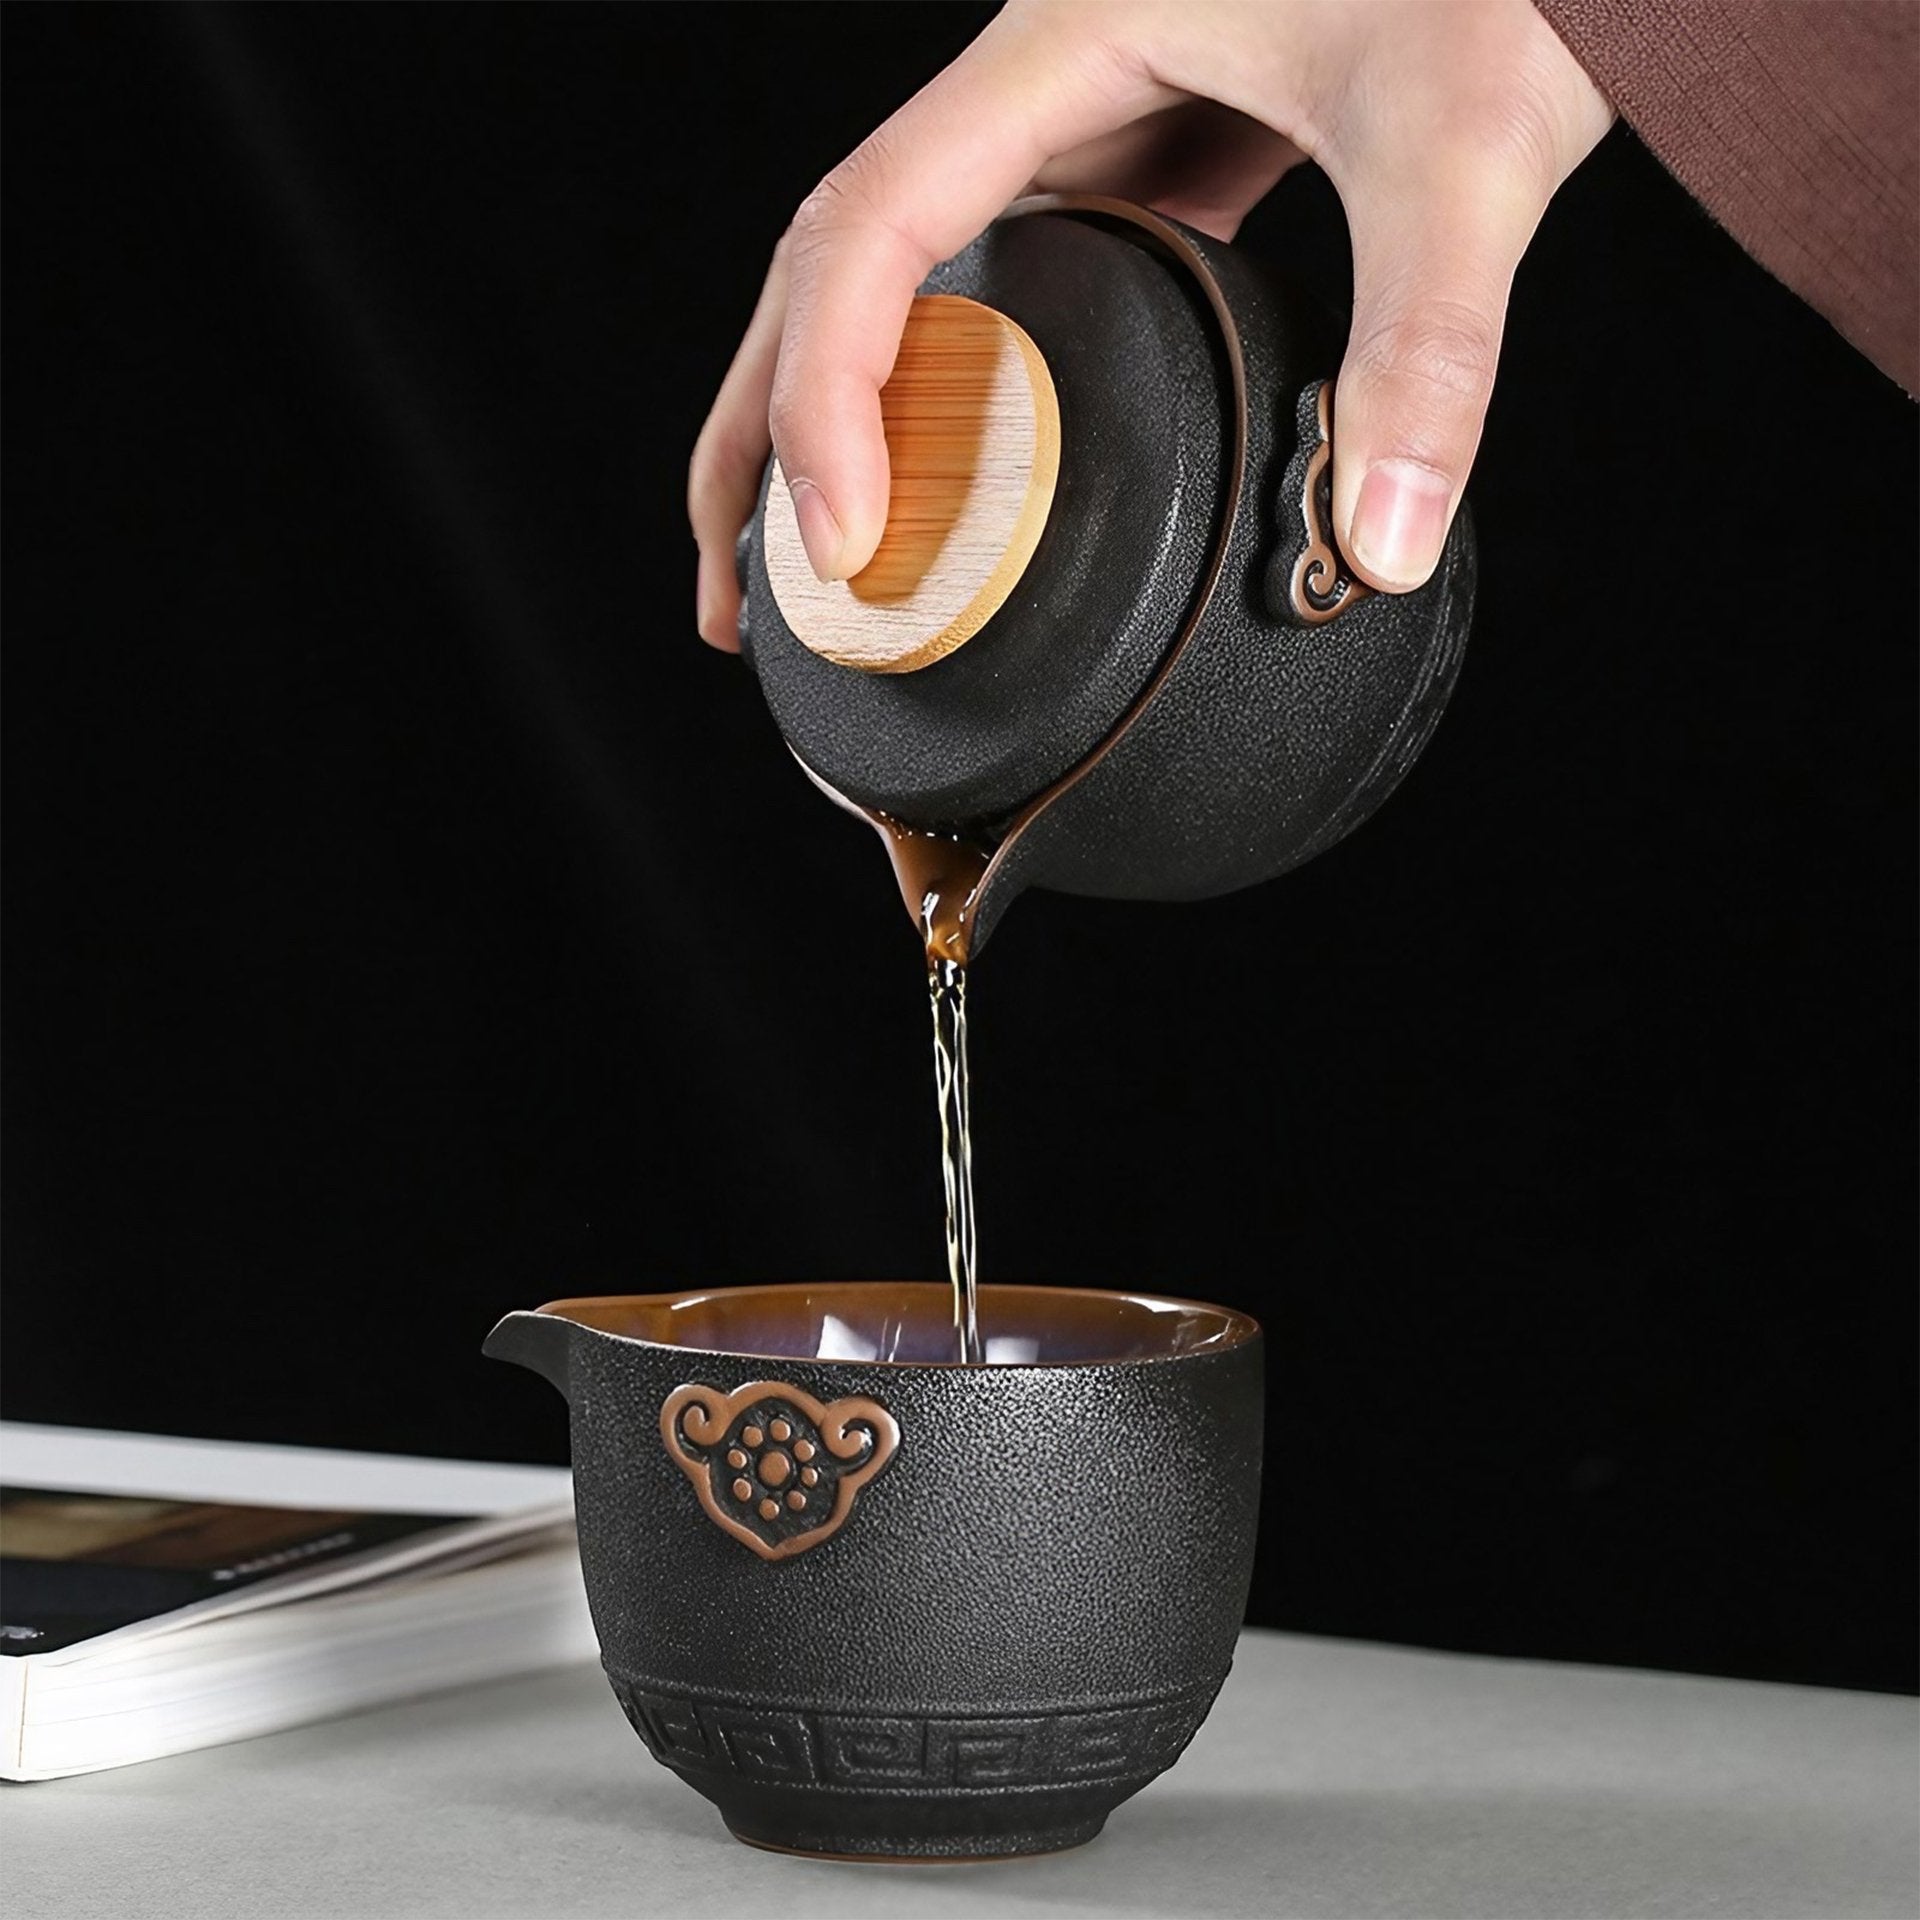 Pouring tea into ornate black cup from teapot, dark background.